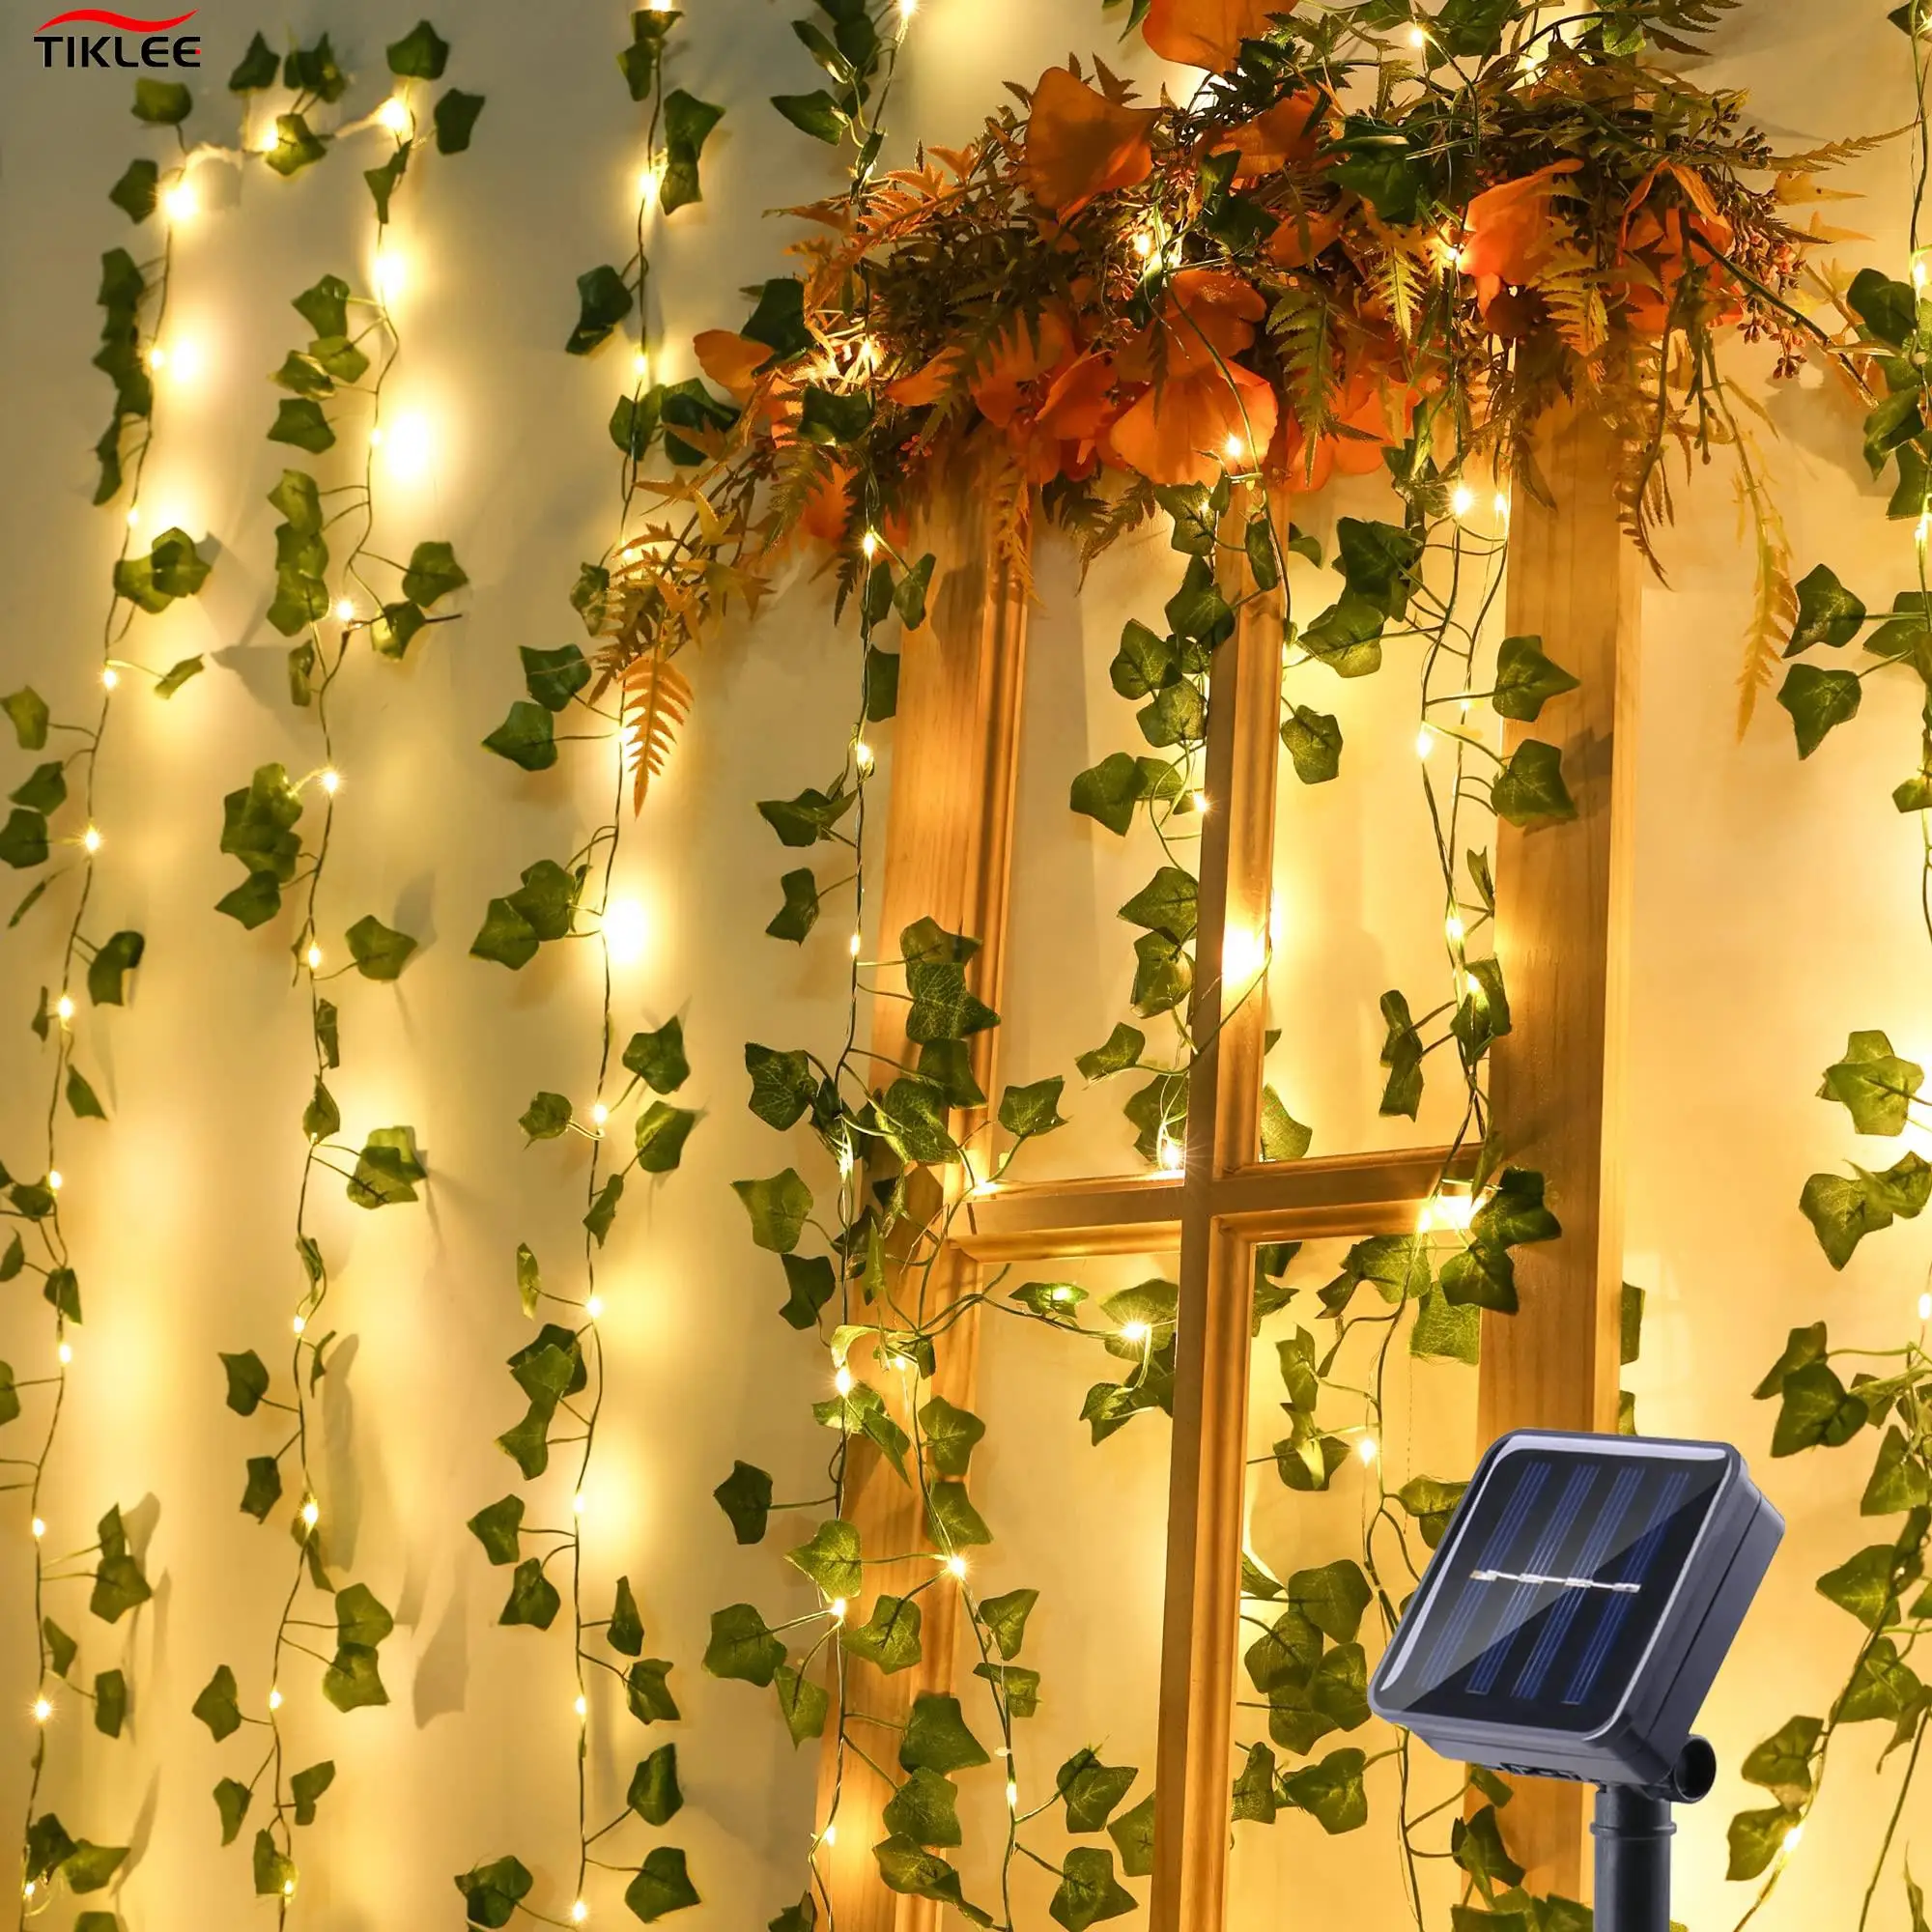 50/100 Solar Leds Green Leaf Fairy Lights String Artificial Ivy Garland Copper Light Strings for Wedding Bedroom Decorations light post rechargeable tea lights candles table decorations for living room proposal